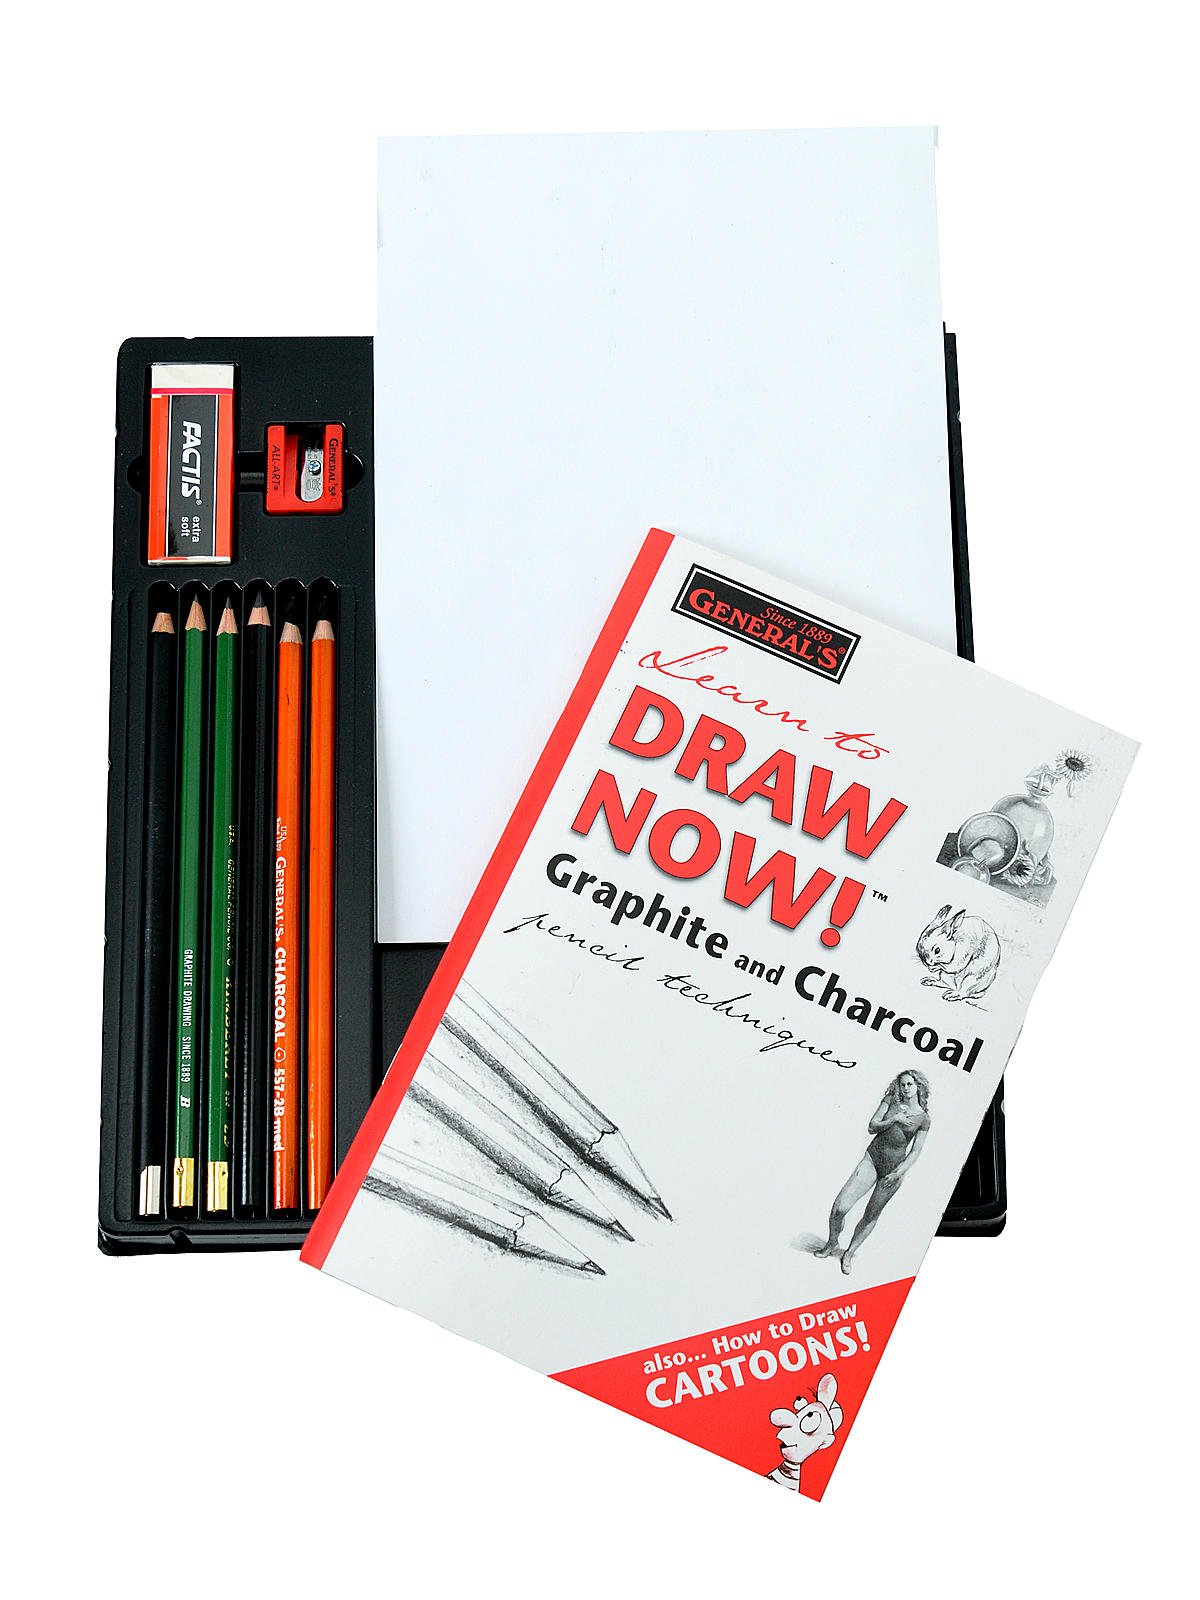 General's Learn To Draw Now!